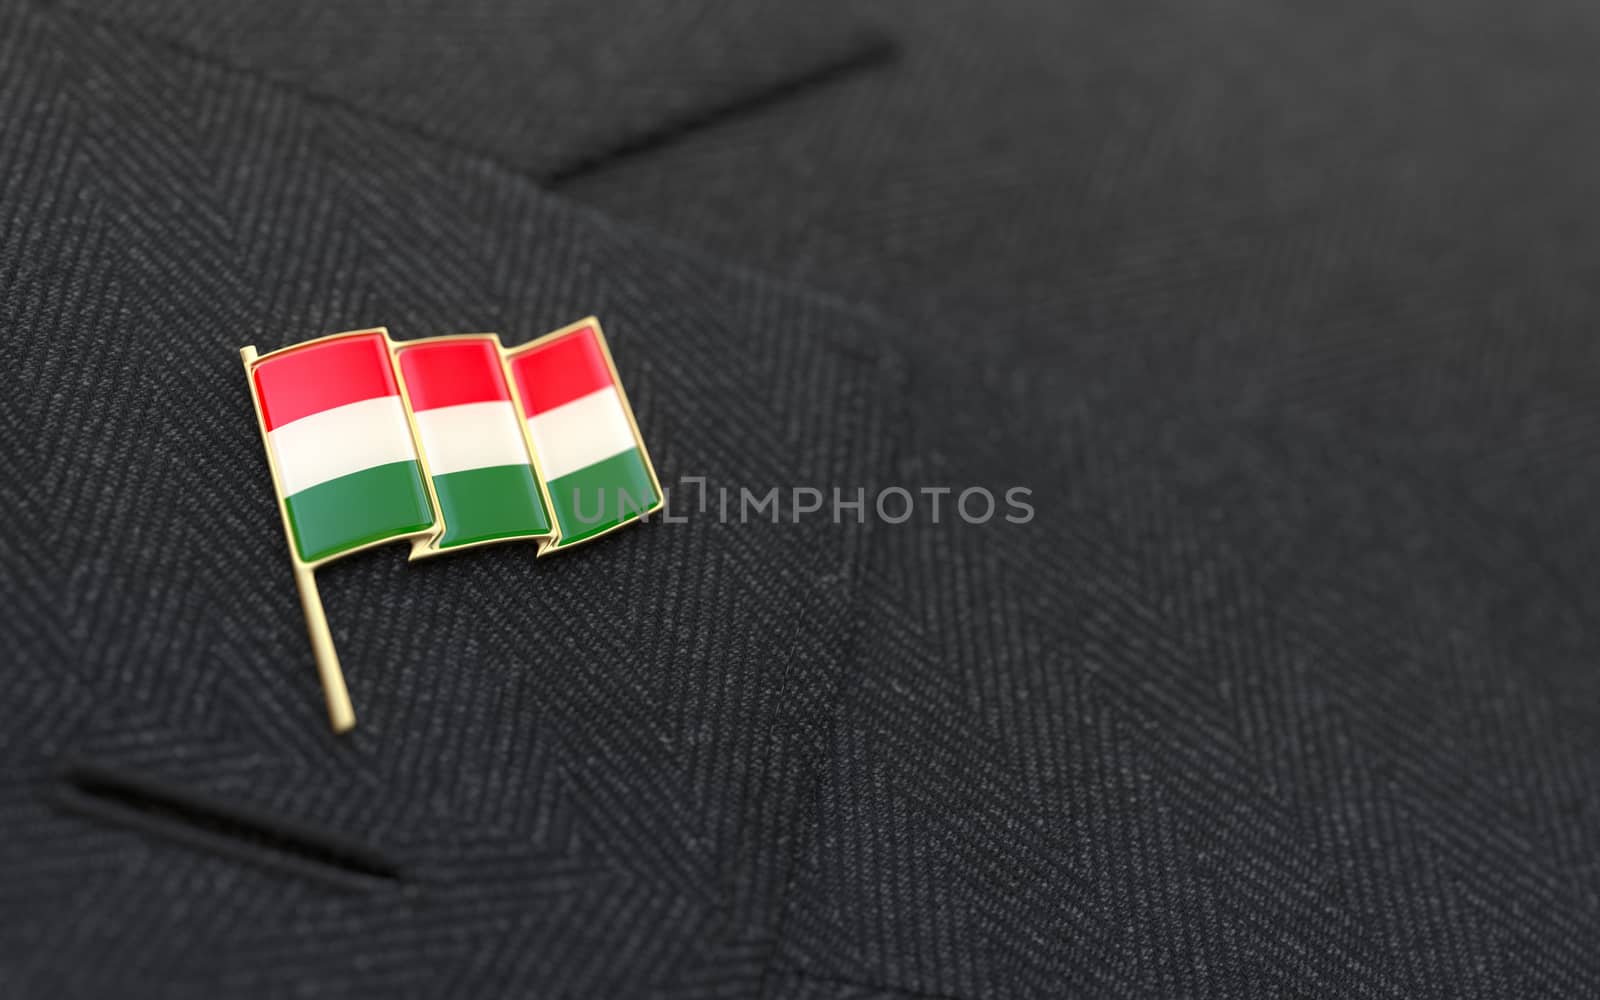 Hungary flag lapel pin on the collar of a business suit jacket shows patriotism